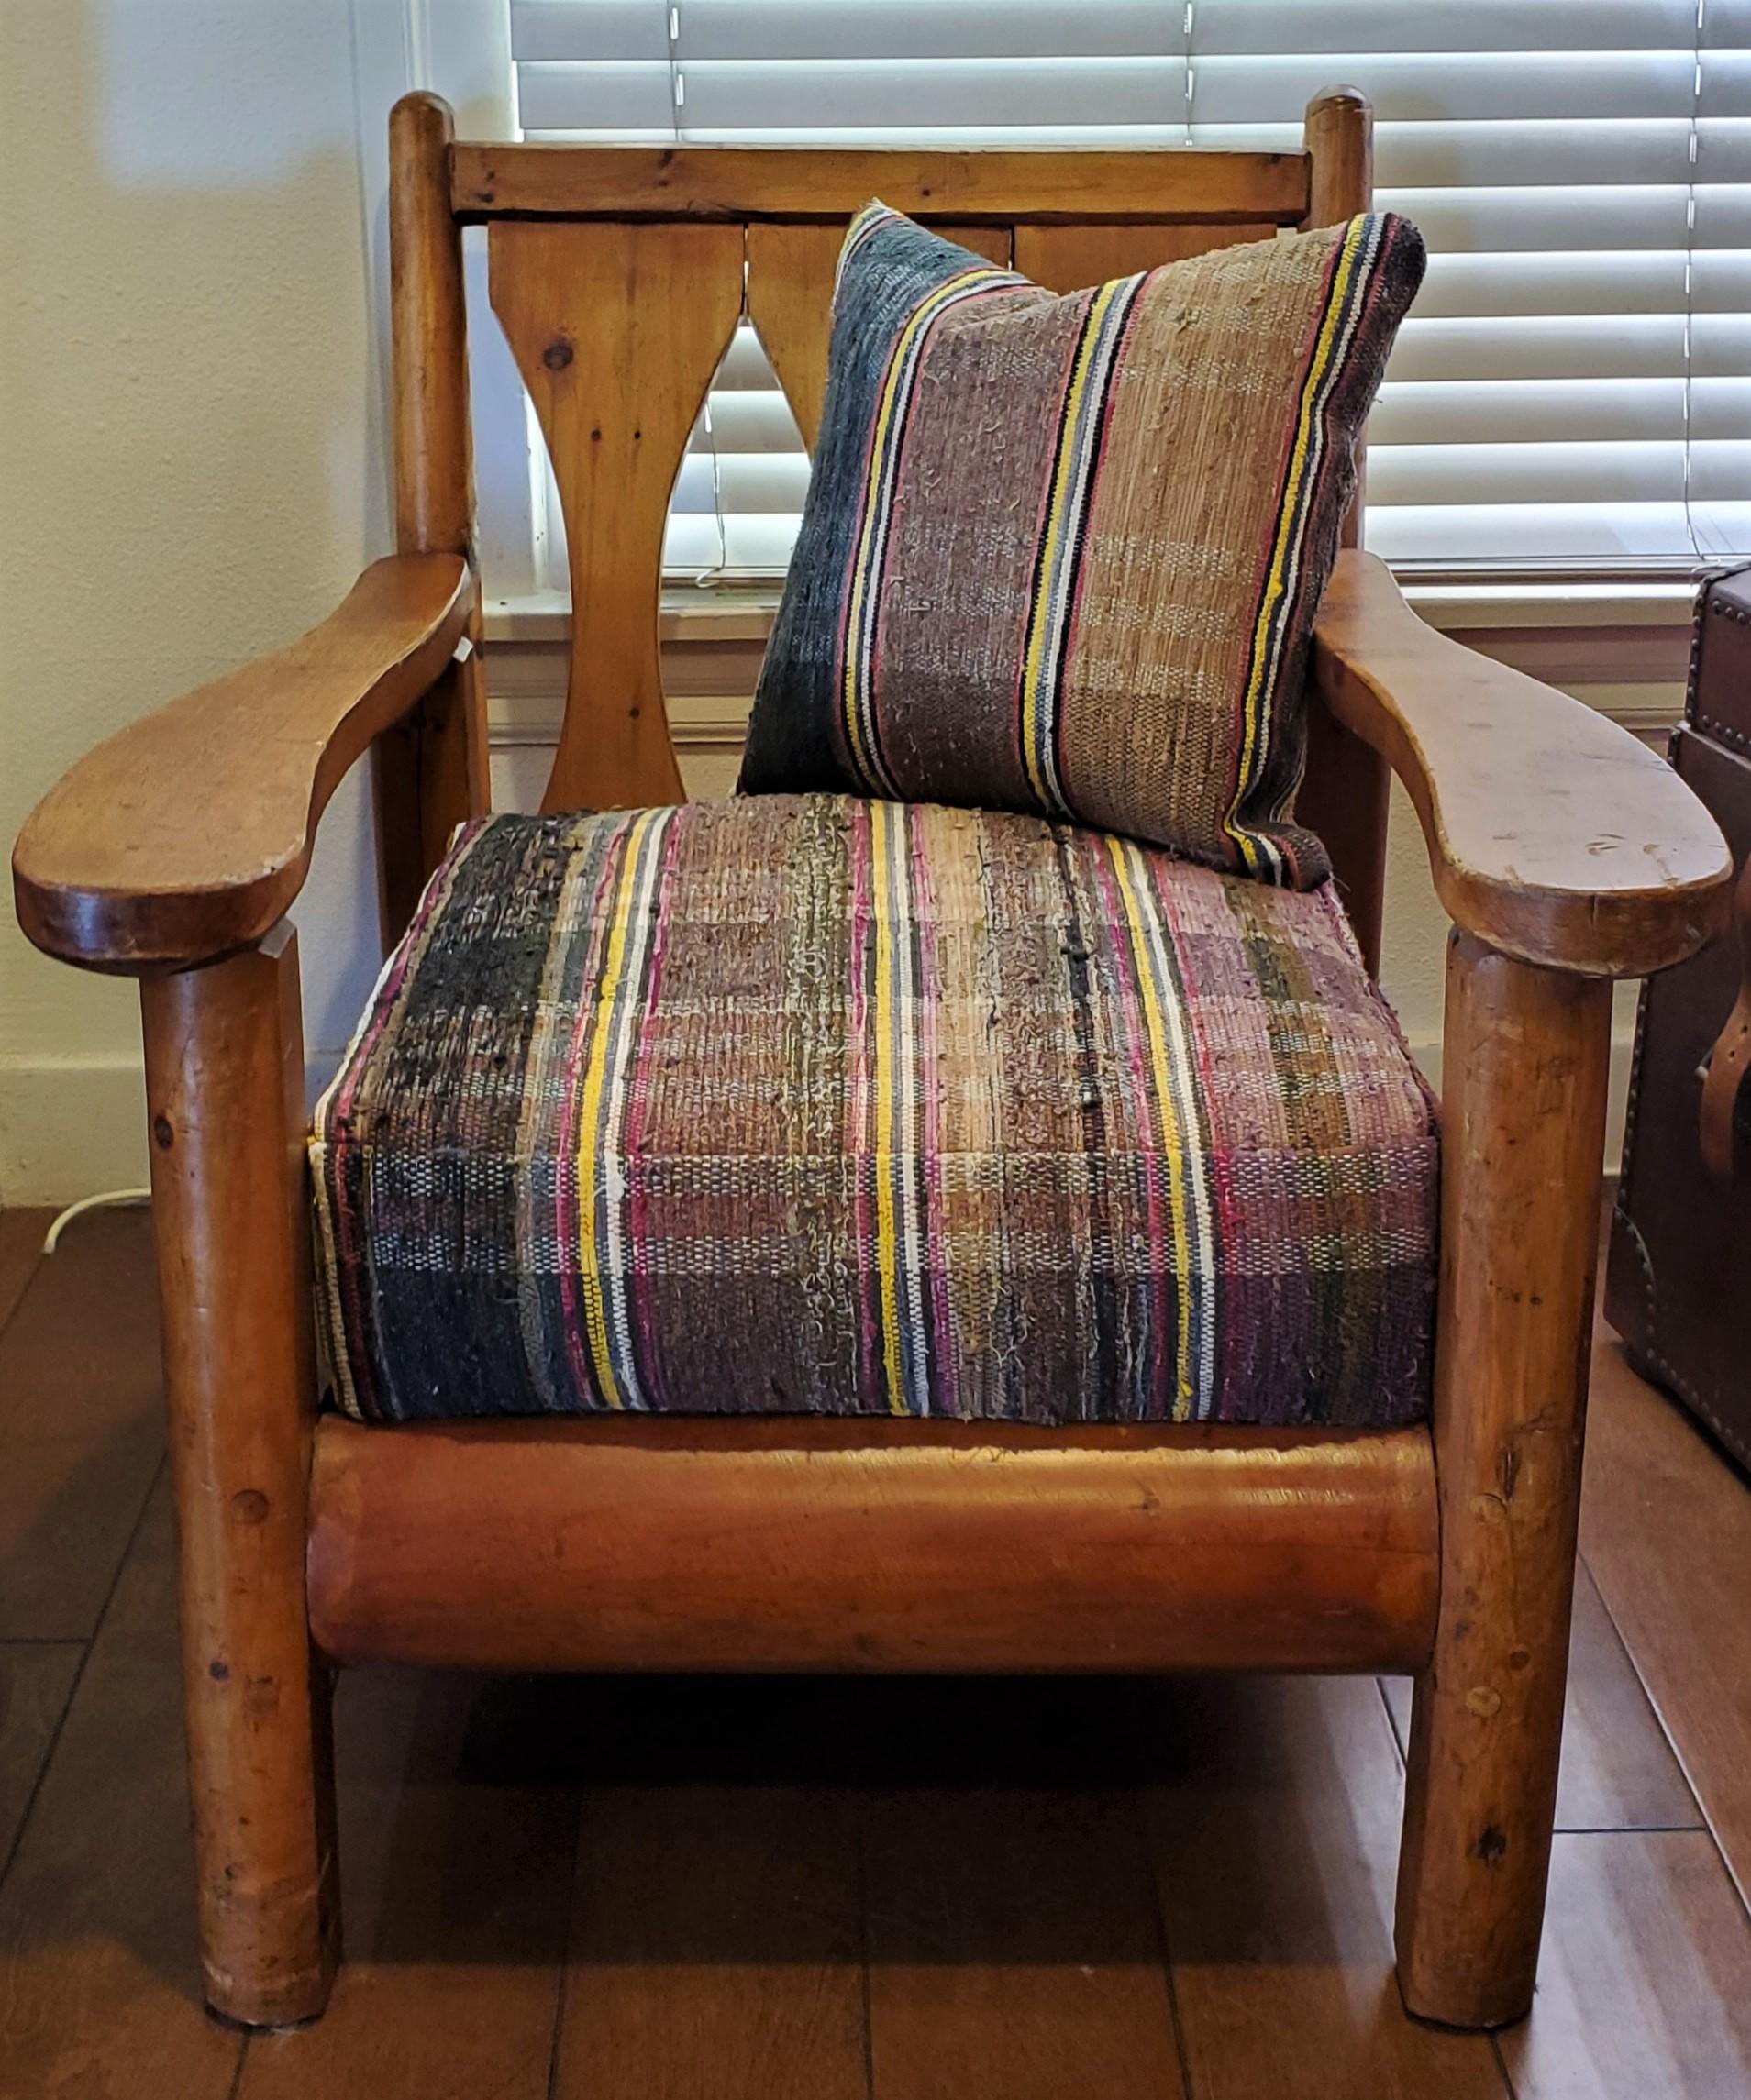 This Rittenhouse rustic old pine arm or club chair from a cabin is upholstered in 19thc rag rug fabric. The condition is very strong and sturdy condition. The construction is wood peg and very strong. The seat and cushions are in fine condition and